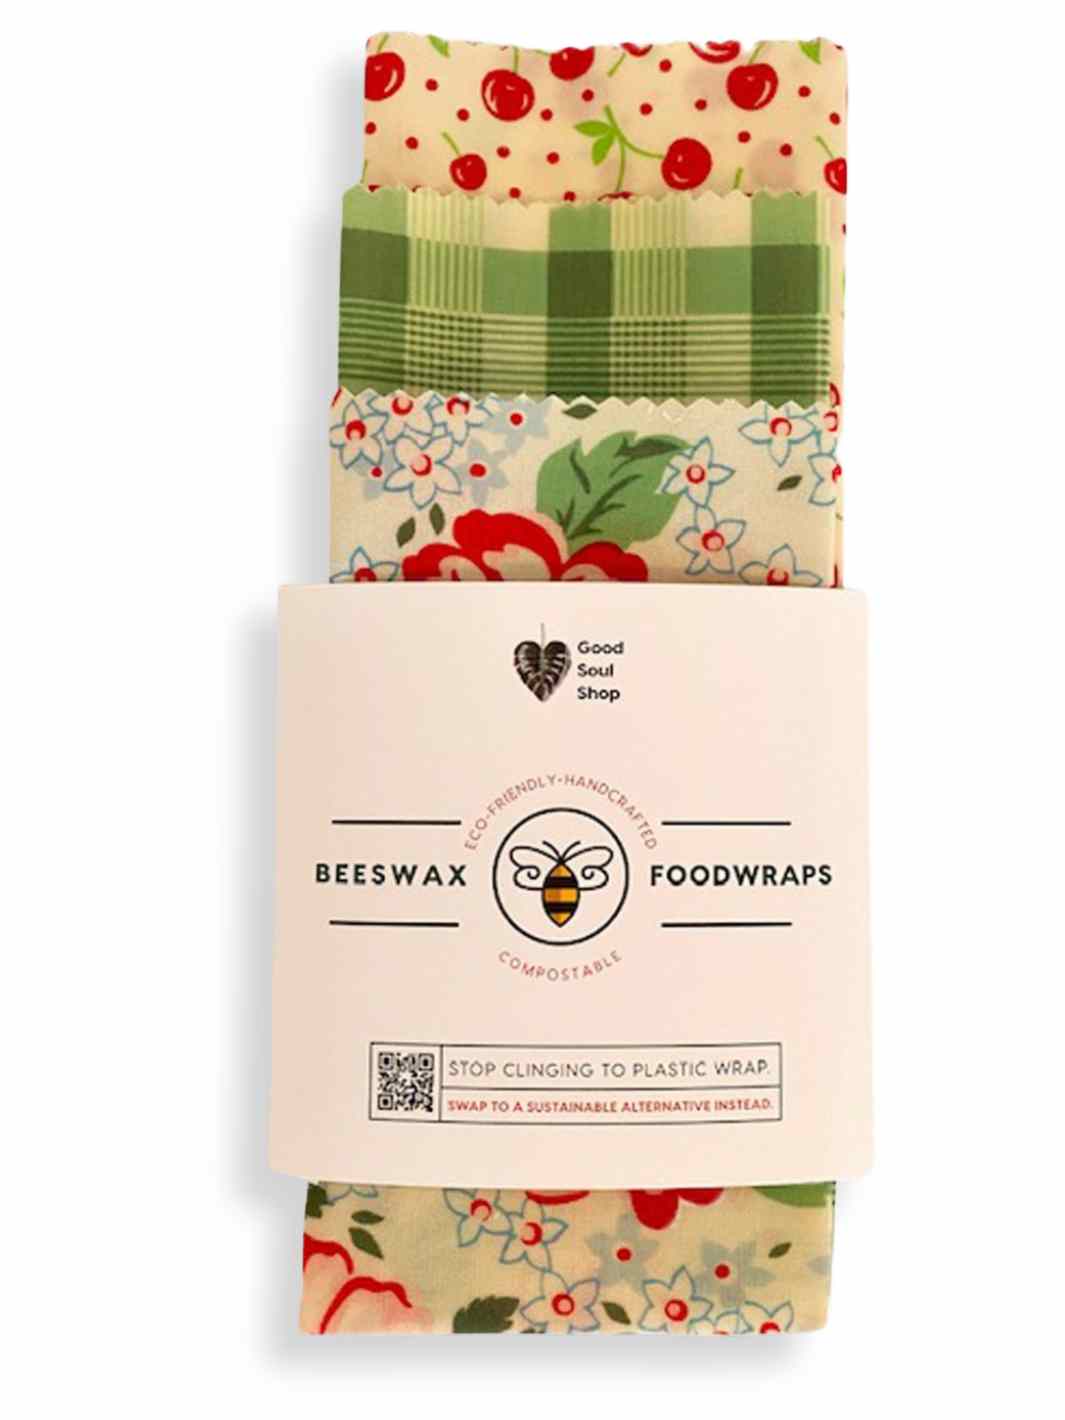 Good Soul Shop Set of three beeswax food wraps in red cherries, green plaid, and red floral pattern